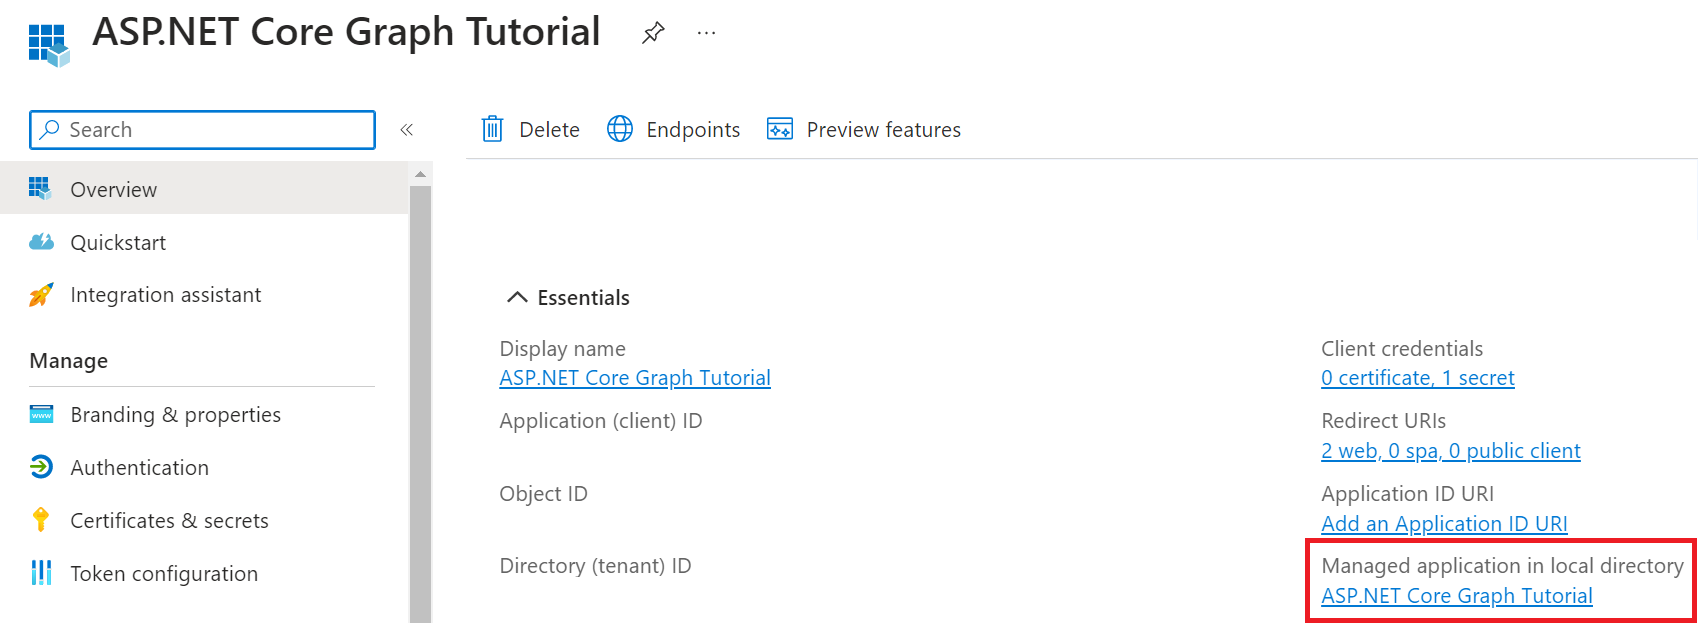 Screen shot that shows the Managed application in local directory option in the overview.